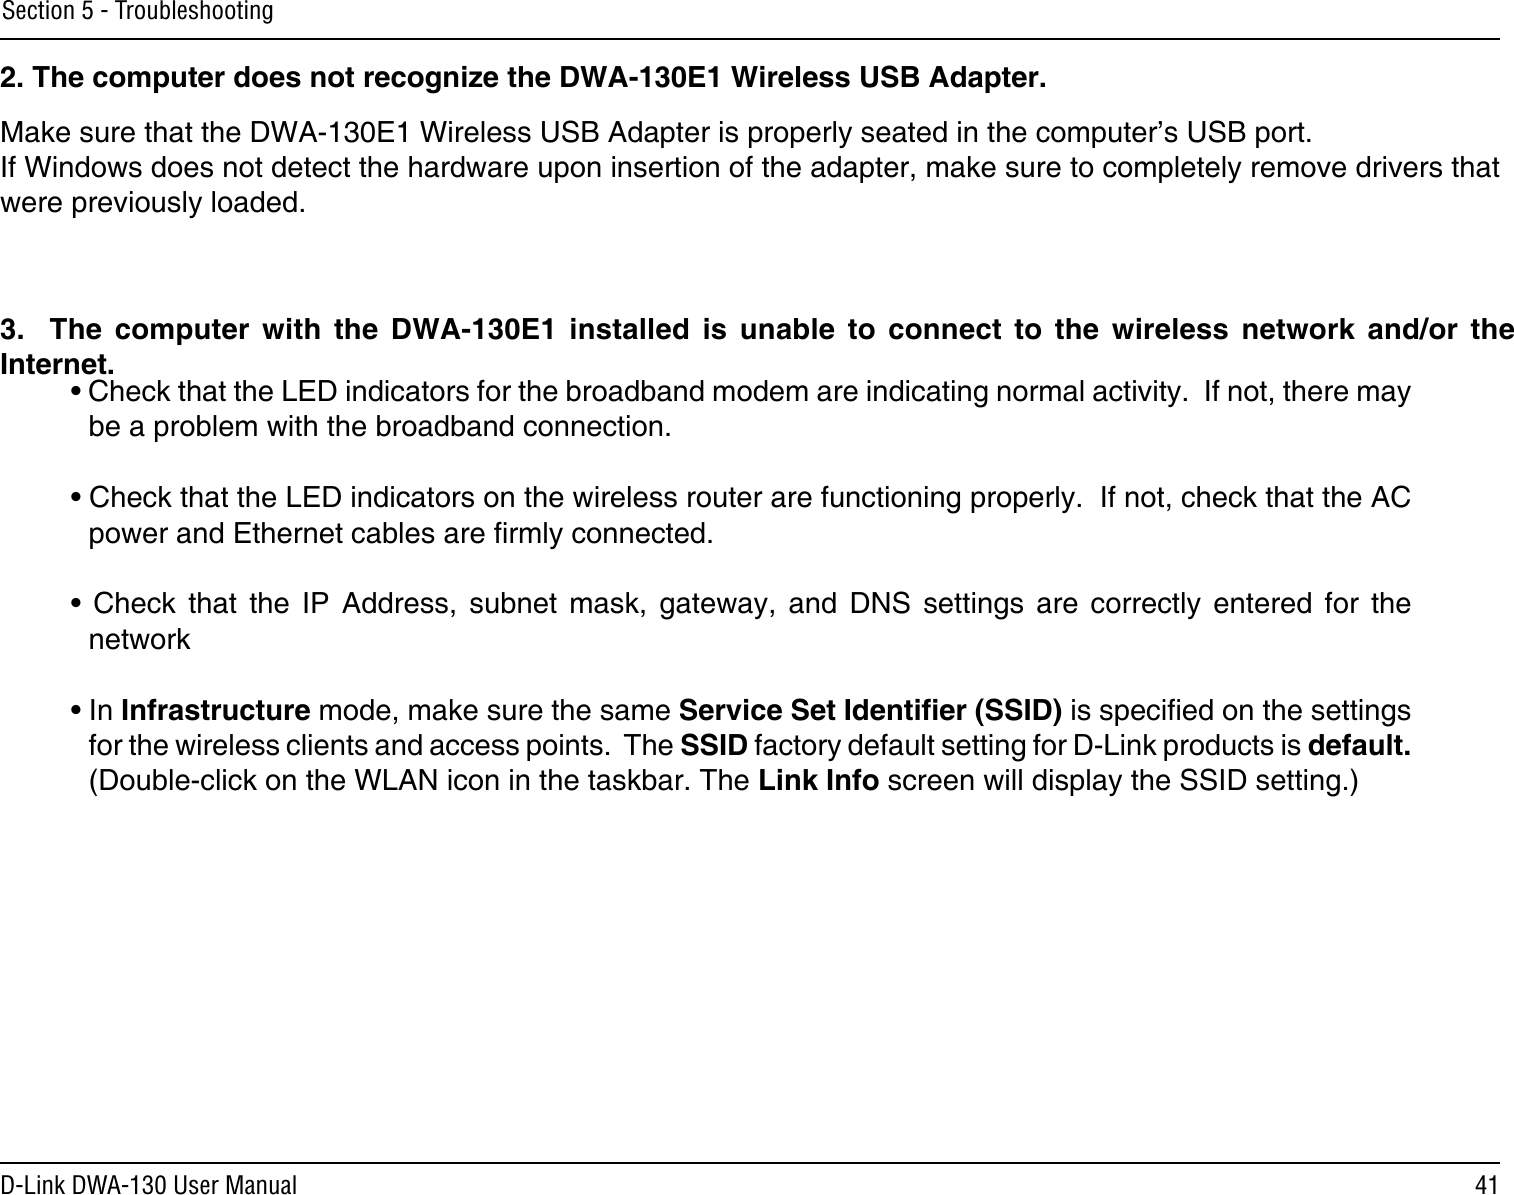 41D-Link DWA-130 User ManualSection 5 - TroubleshootingMake sure that the DWA-130E1 Wireless USB Adapter is properly seated in the computer’s USB port.If Windows does not detect the hardware upon insertion of the adapter, make sure to completely remove drivers that were previously loaded. 2. The computer does not recognize the DWA-130E1 Wireless USB Adapter.• Check that the LED indicators for the broadband modem are indicating normal activity.  If not, there may be a problem with the broadband connection.• Check that the LED indicators on the wireless router are functioning properly.  If not, check that the AC power and Ethernet cables are rmly connected.•  Check  that  the  IP  Address,  subnet  mask,  gateway,  and  DNS  settings  are  correctly  entered  for  the network• In Infrastructure mode, make sure the same Service Set Identier (SSID) is specied on the settings for the wireless clients and access points.  The SSID factory default setting for D-Link products is default.  (Double-click on the WLAN icon in the taskbar. The Link Info screen will display the SSID setting.)3.    The  computer  with  the  DWA-130E1  installed  is  unable  to  connect  to  the  wireless  network  and/or  the Internet.